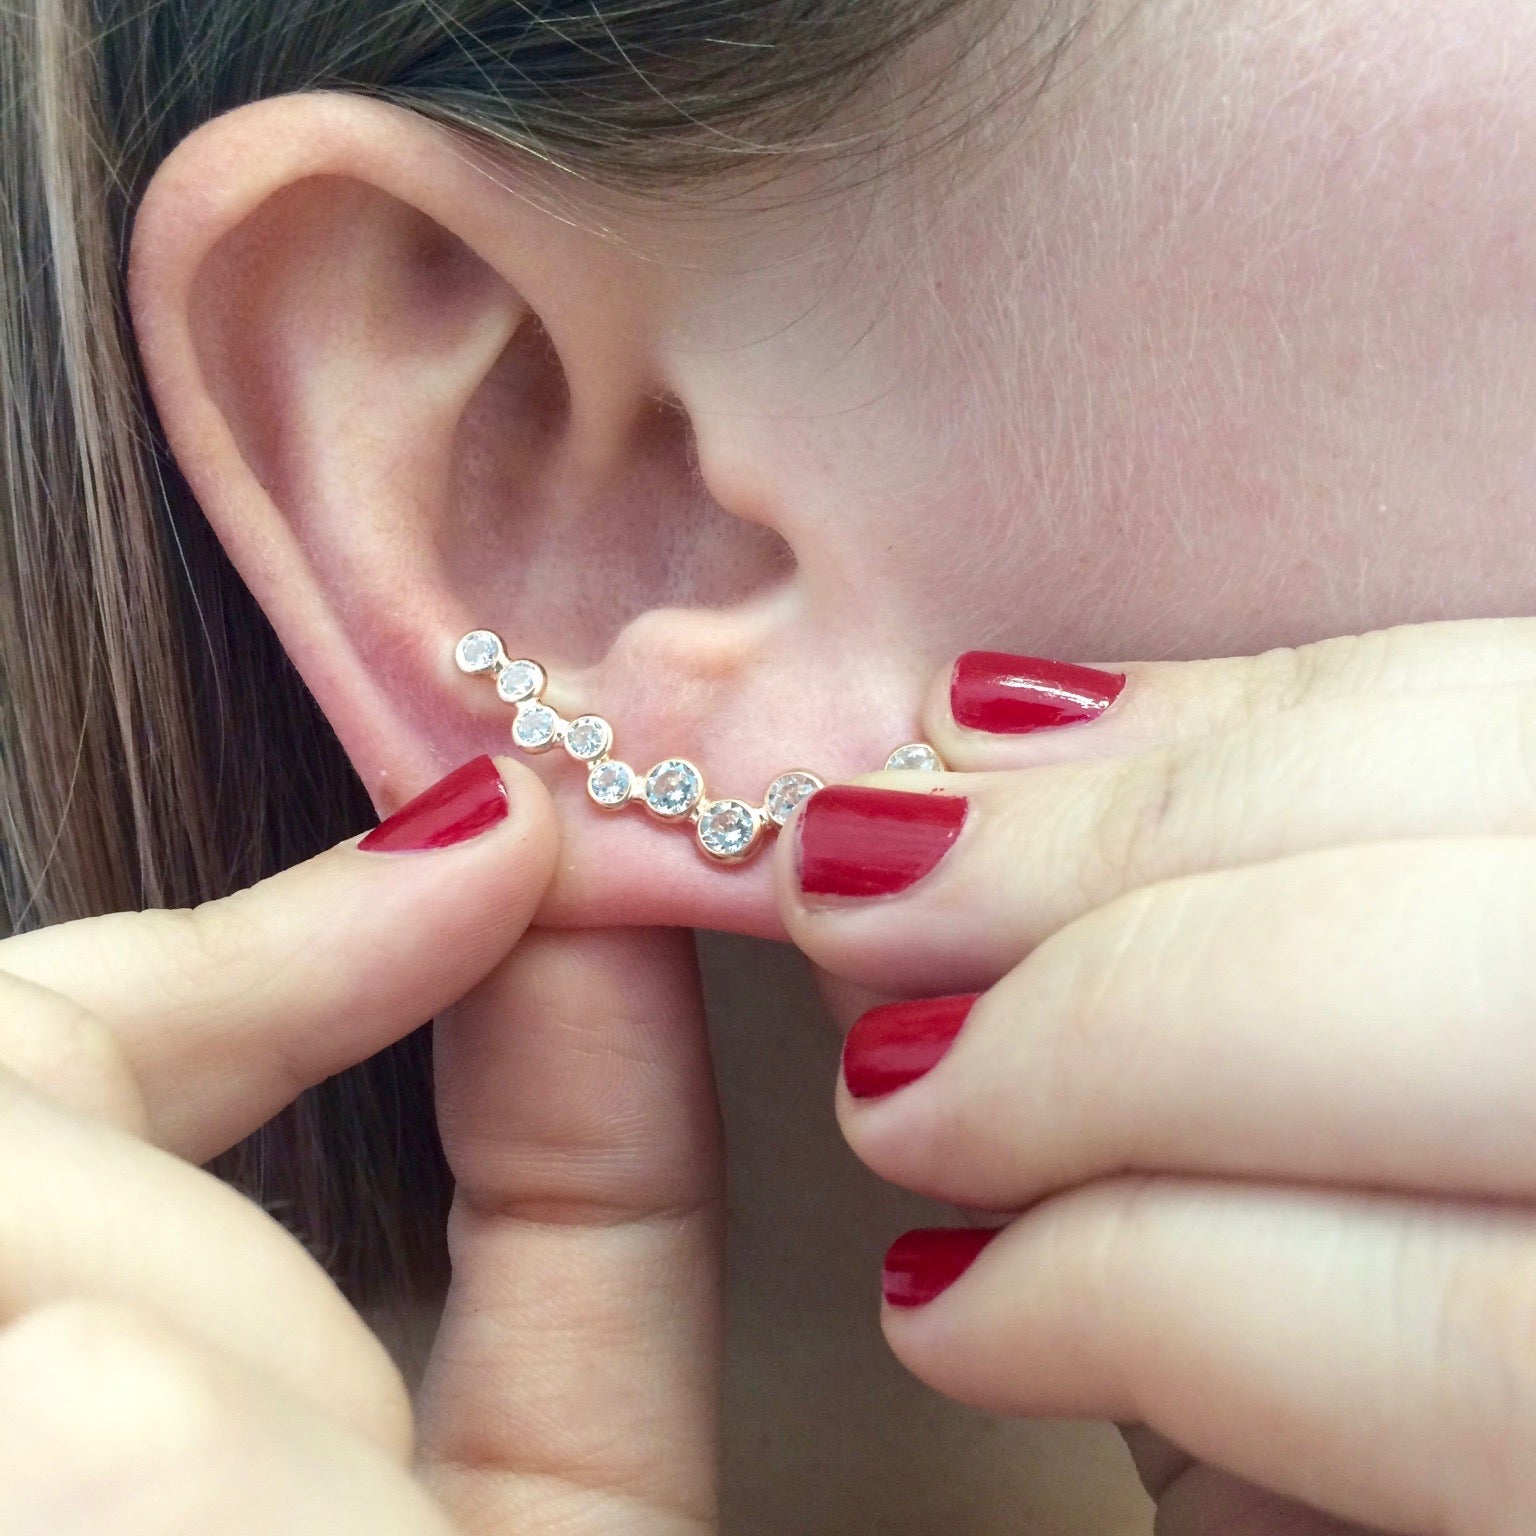 How To Style An Ear Cuff  The Astley Clarke Jewellery Blog